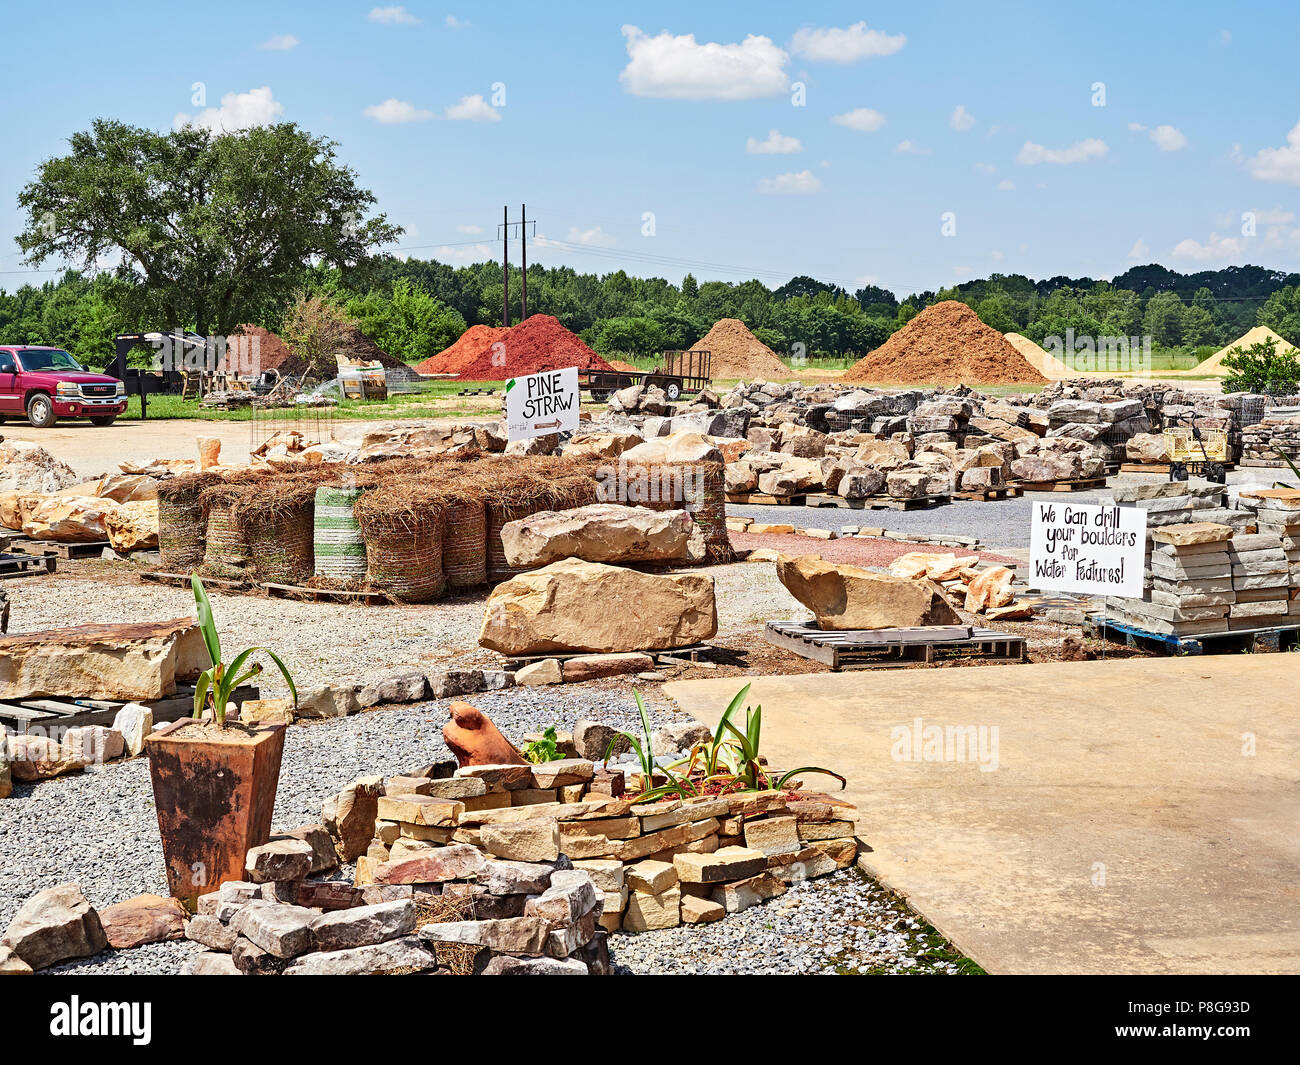 Landscaping materials yard with large rocks and stones used in landscaping construction work in Montgomery Alabama, USA. Stock Photo